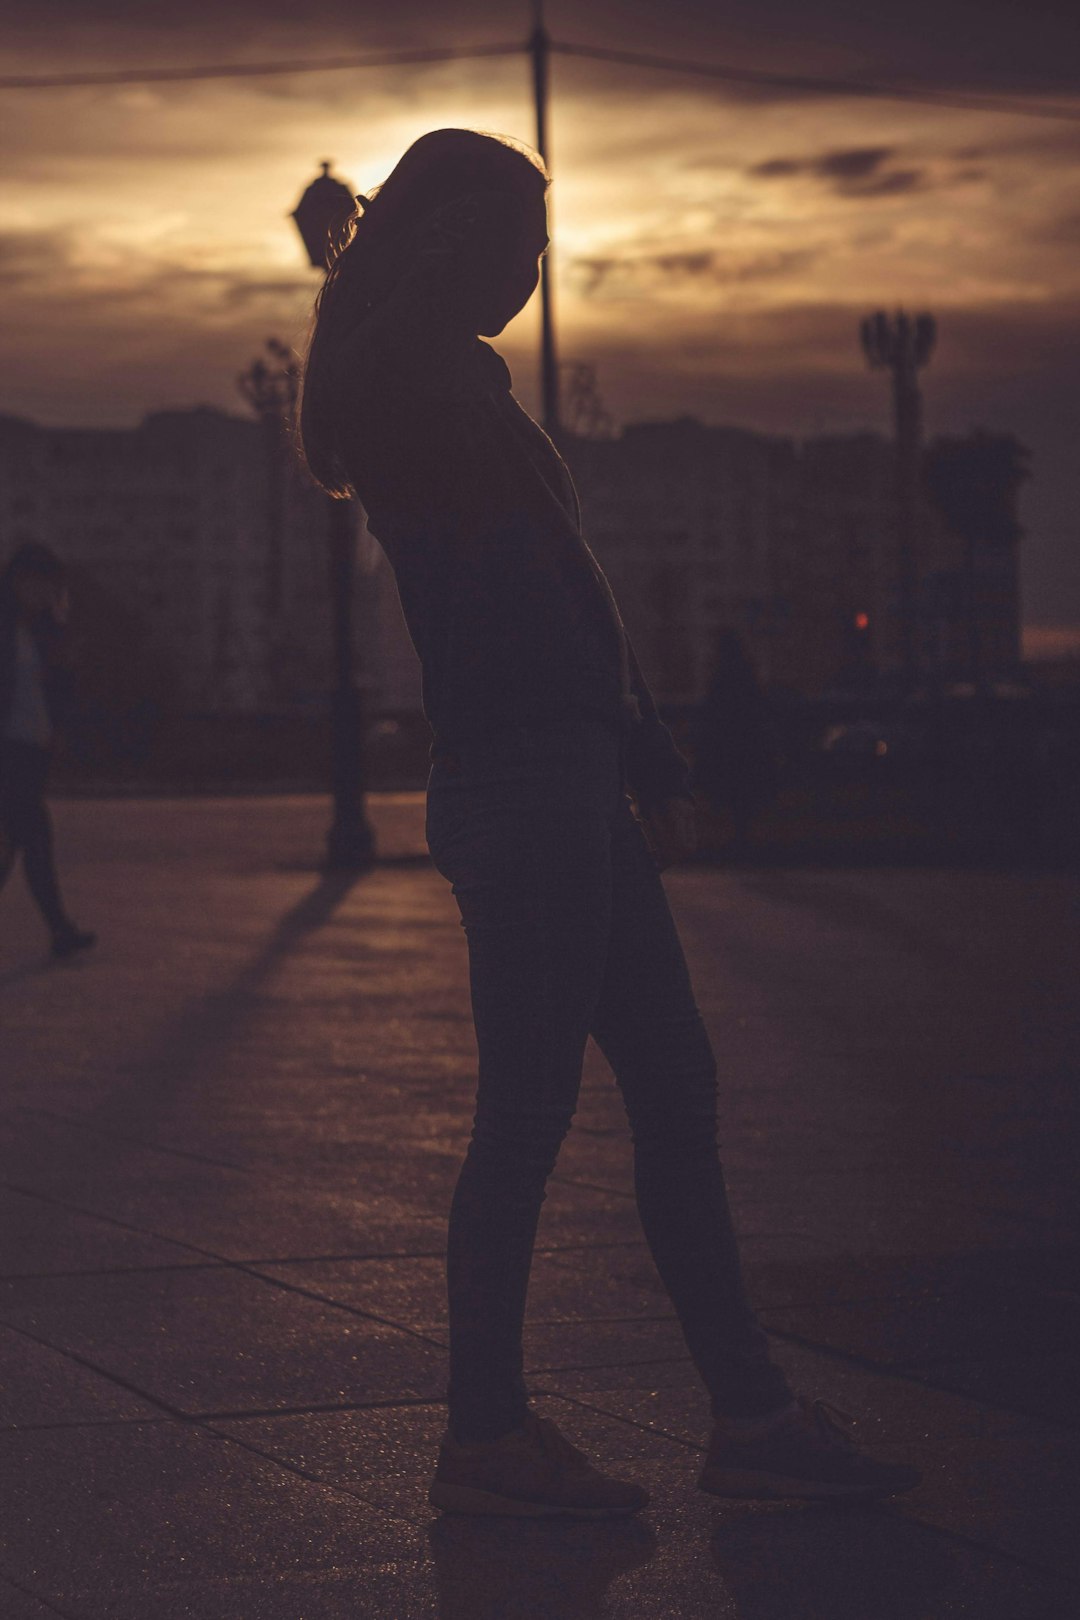 silhouette of person walking on street during night time